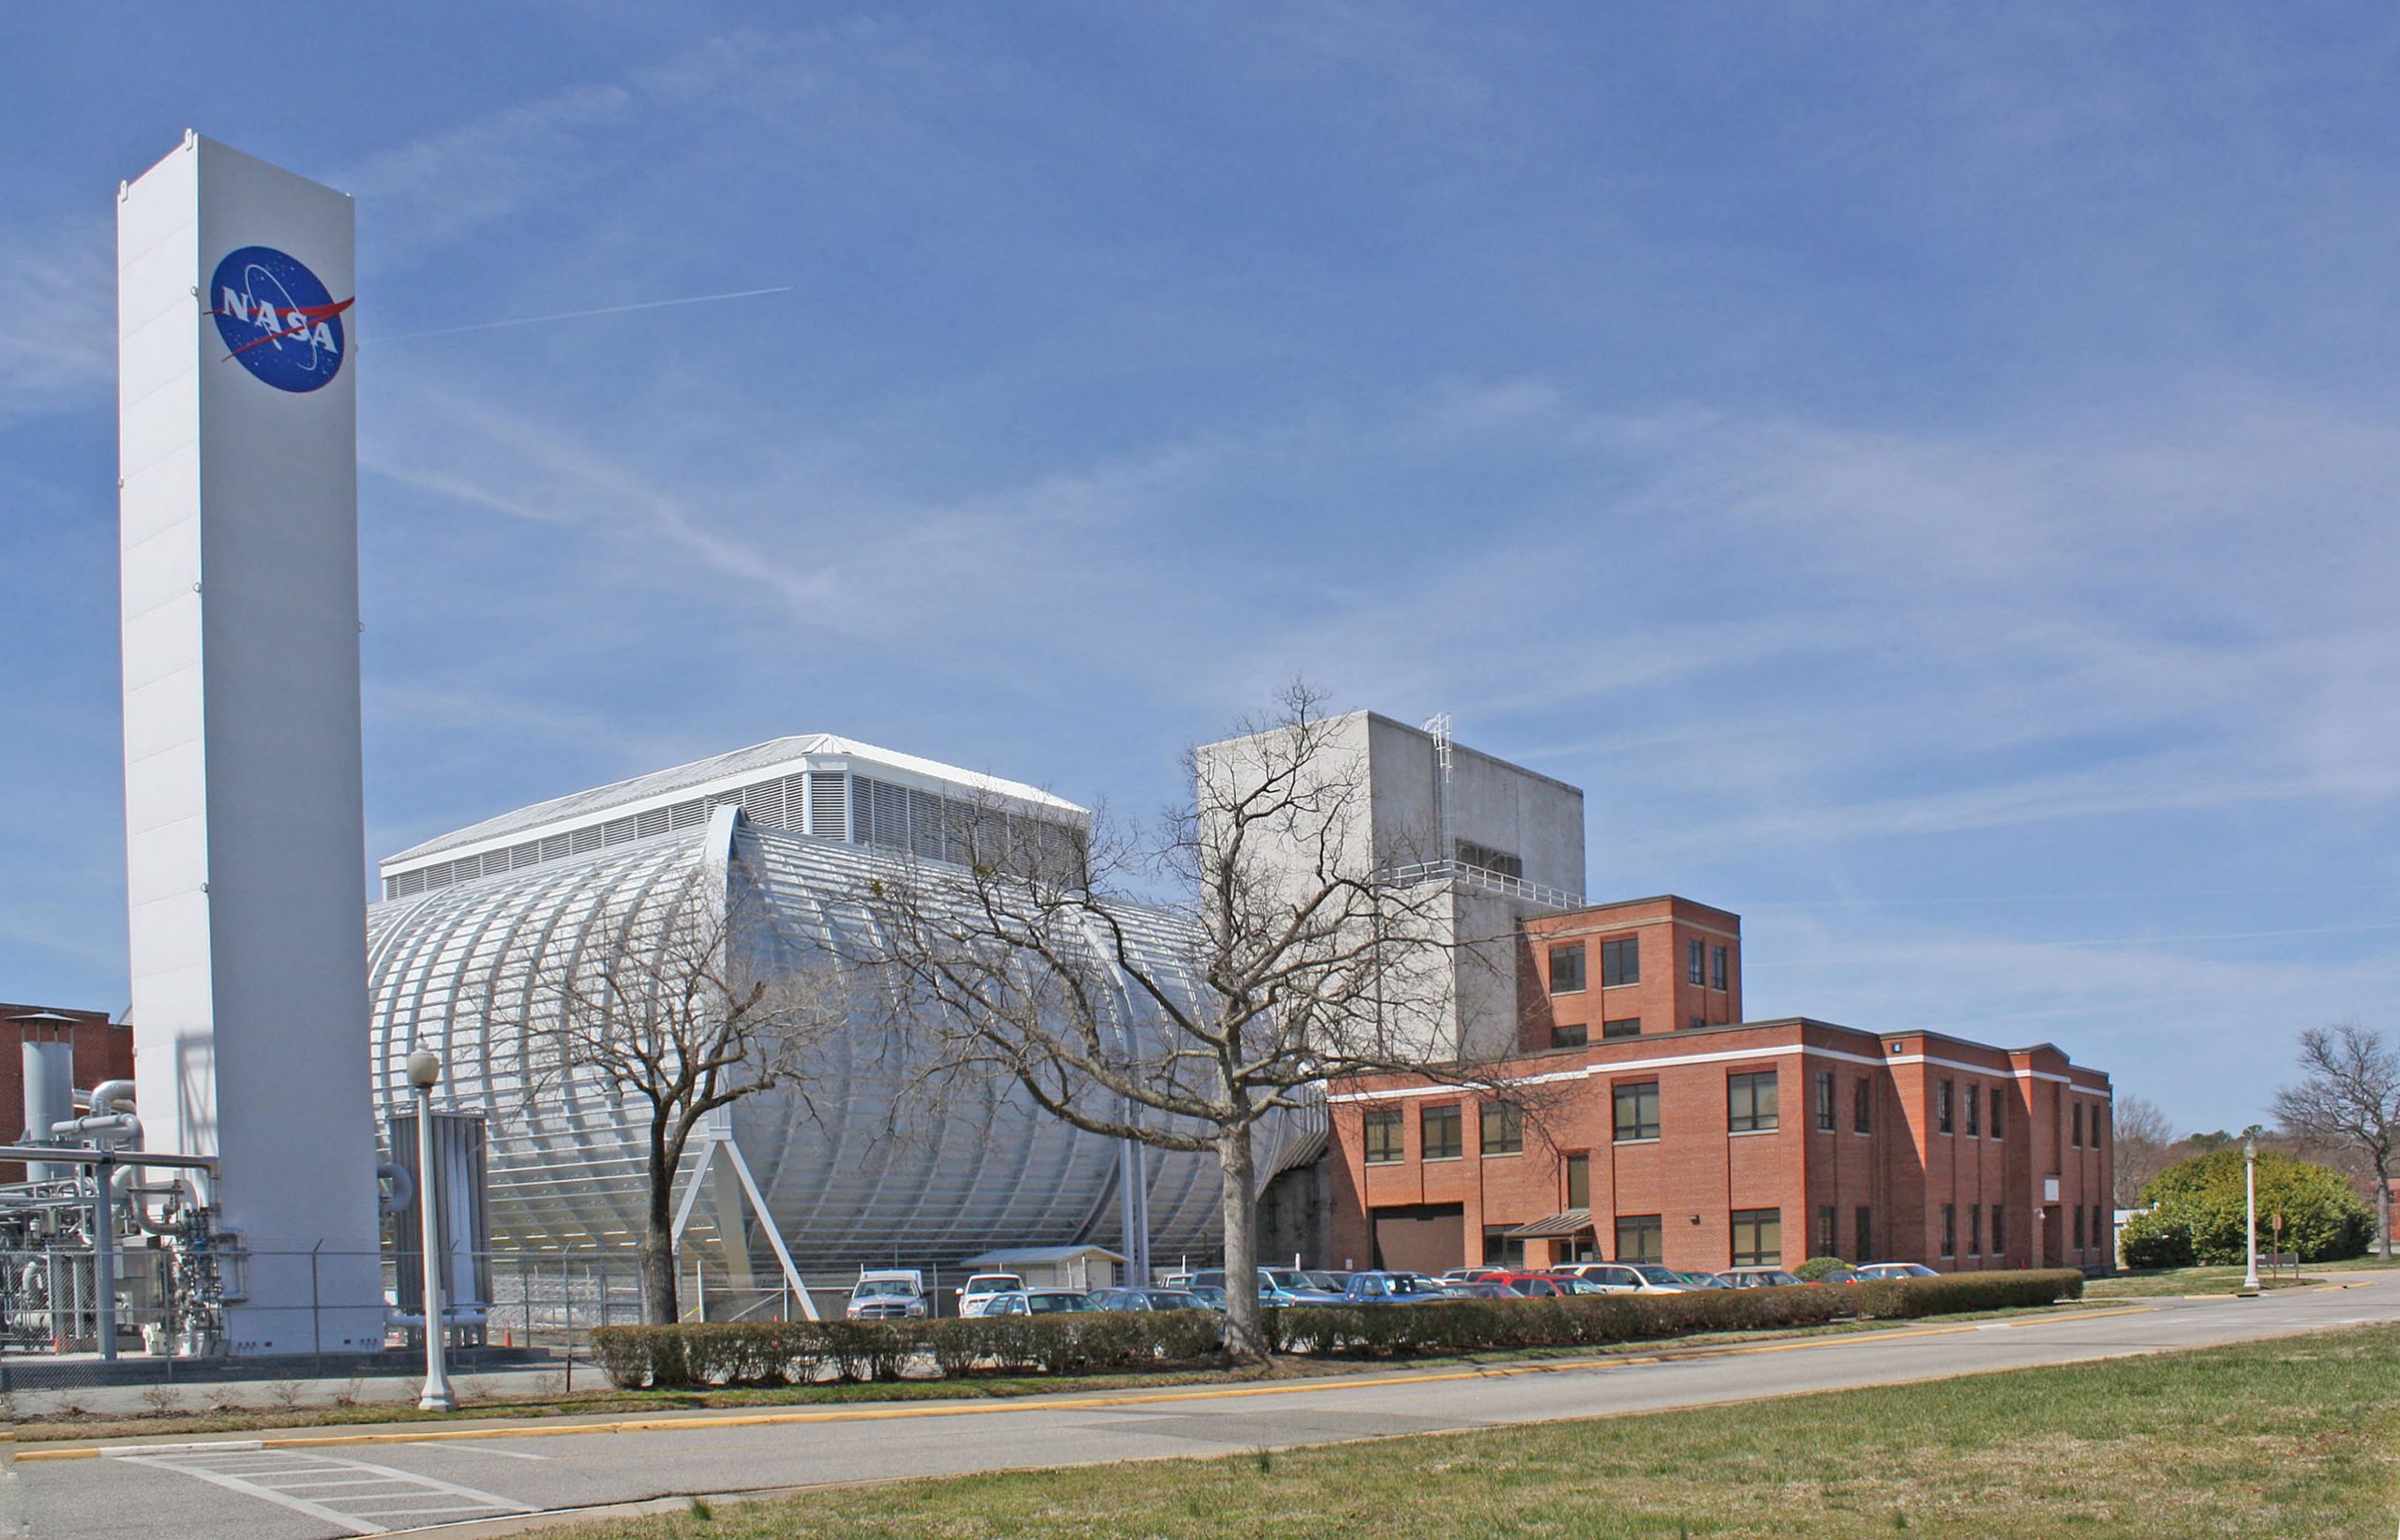 NASA Langley Research Center Historic District